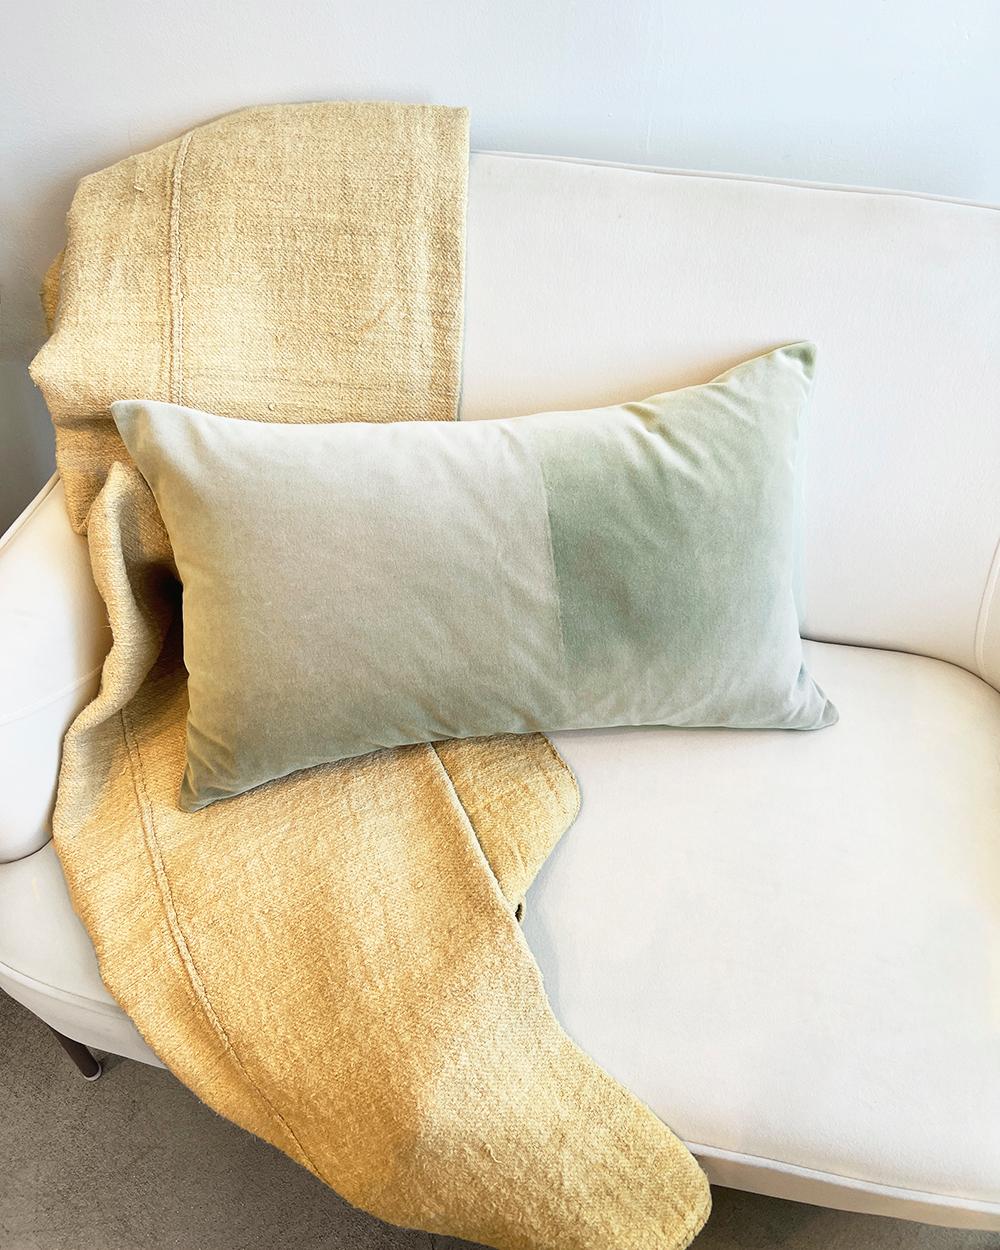 A subtle green throw pillow for your living room couch. This one-of-a-kind throw pillow adds a unique touch to living spaces. Hand-painted on velvet fabric, it has a minimalist and rustic European style which is subtle but striking. A perfect home